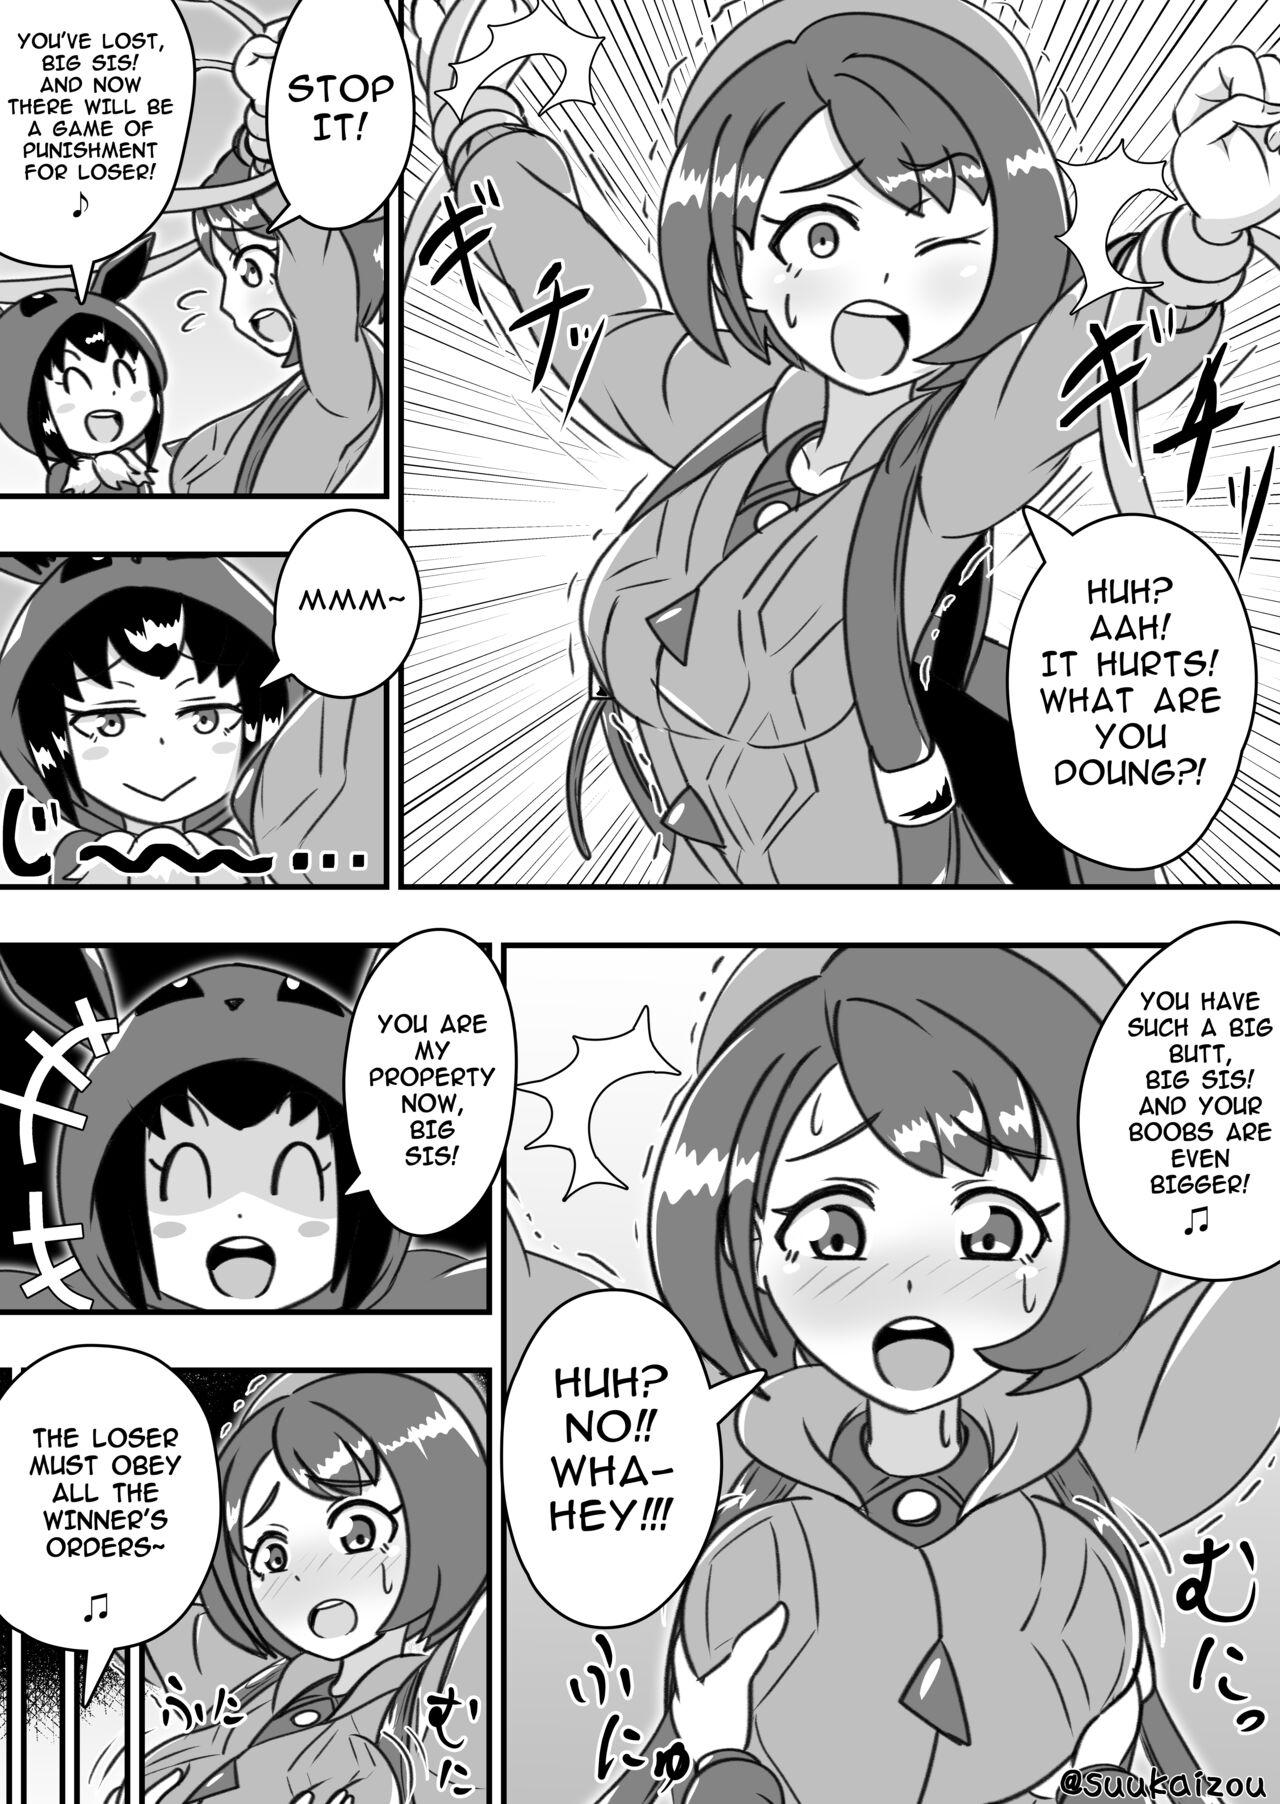 Toy Yuri-chan, Pokemon pretend to be naked and take a walk with a nipple lead - Pokemon | pocket monsters Men - Page 3